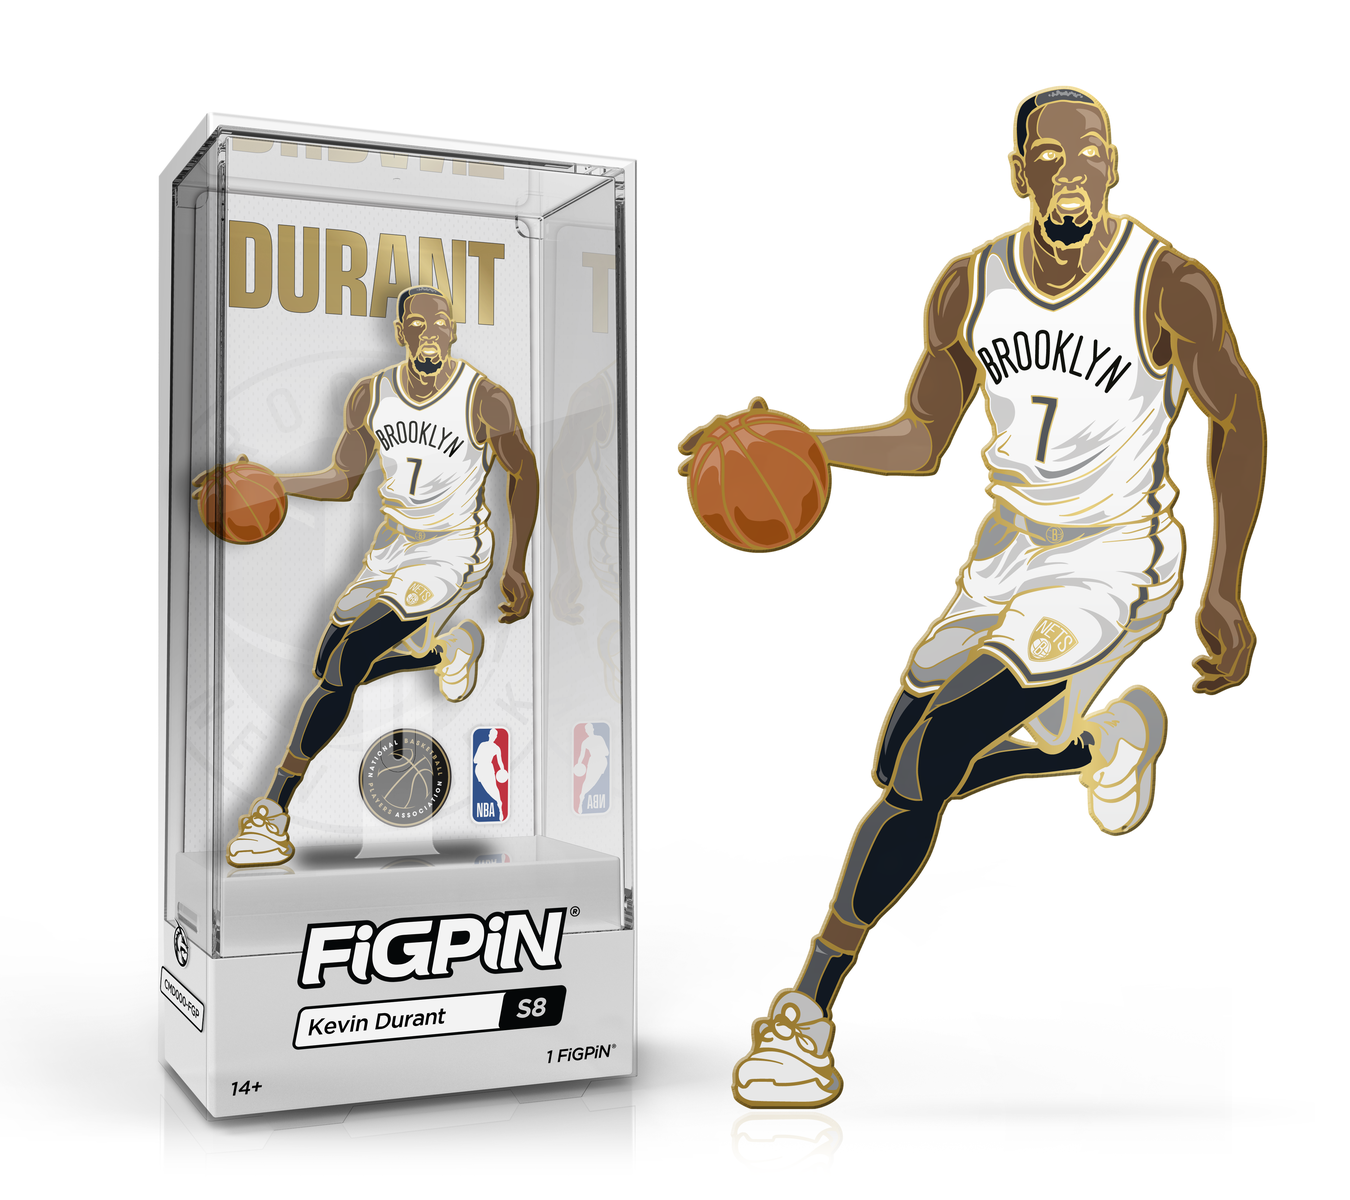 Kevin Durant (S8)